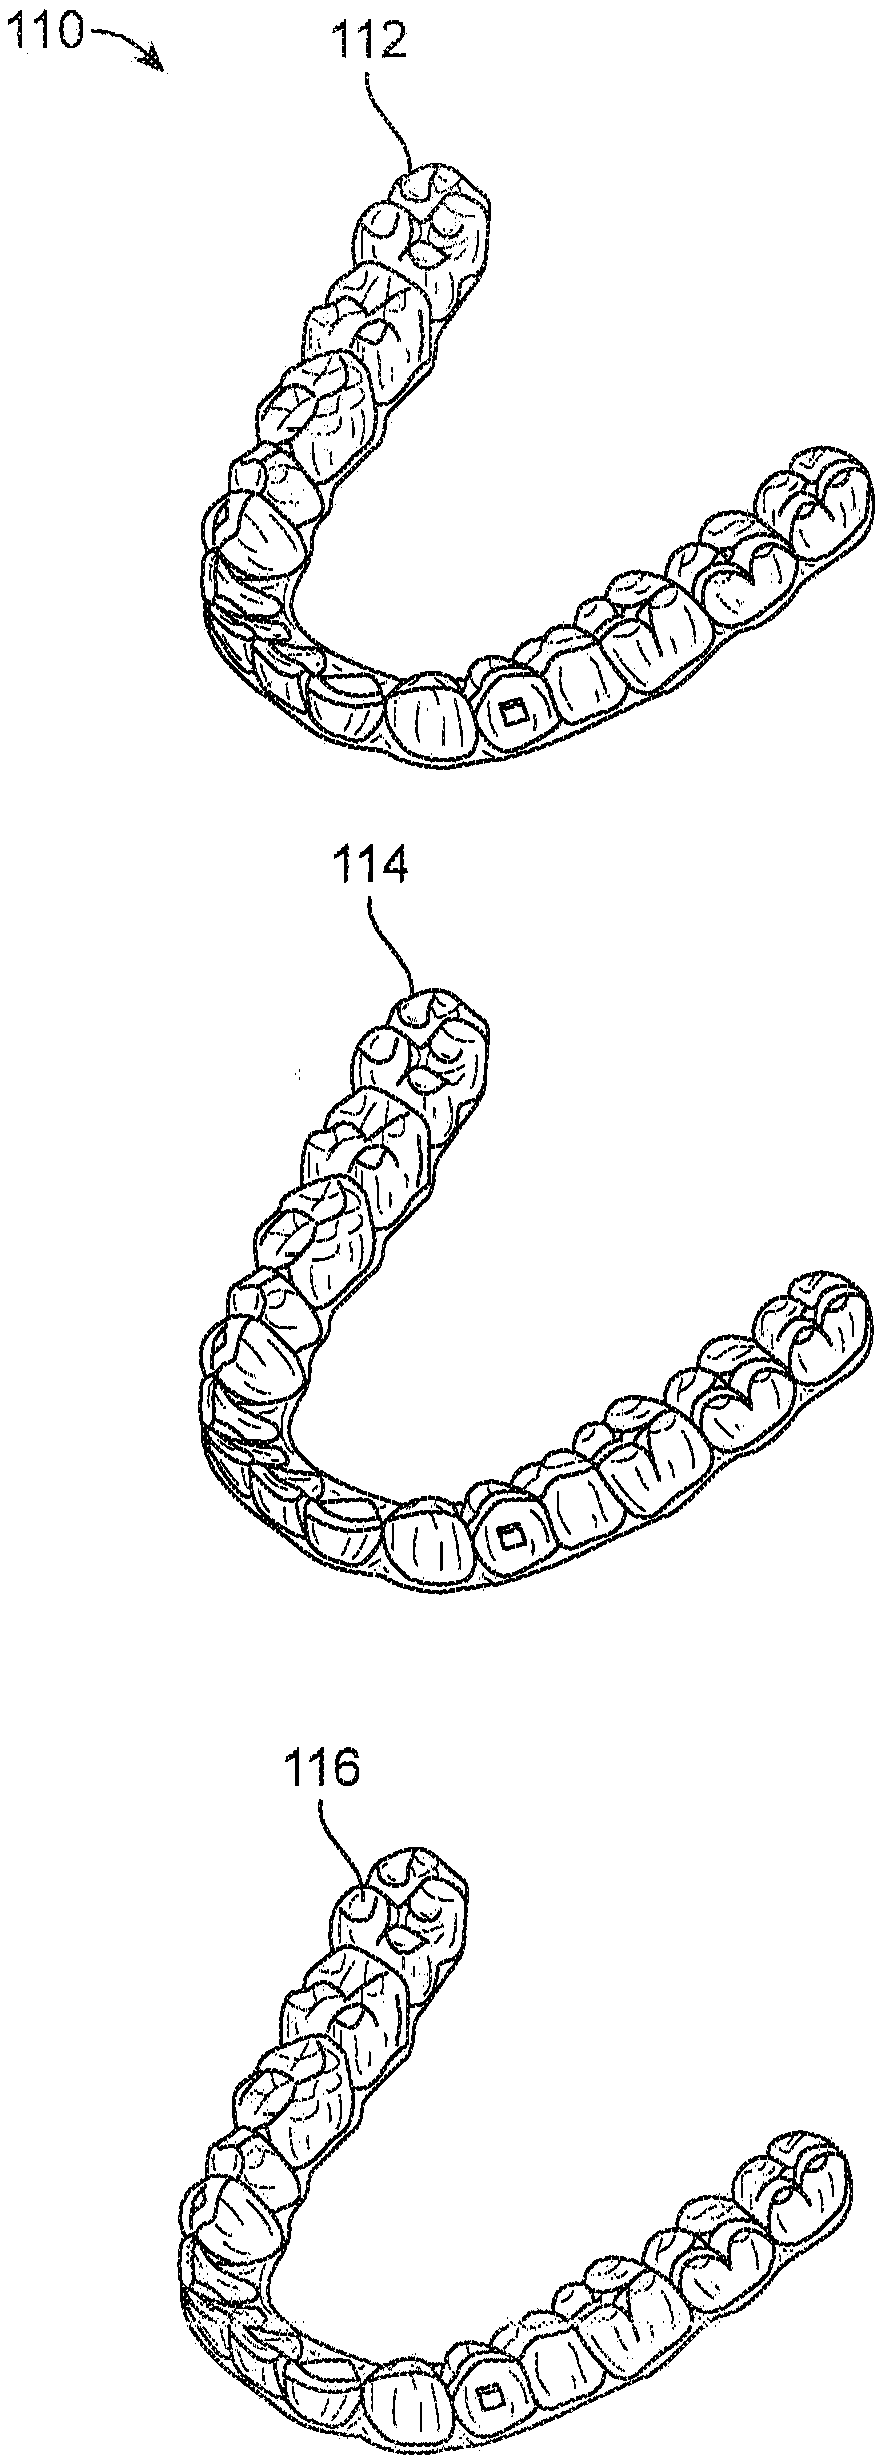 Fabrication of attachment templates and multi-material aligners